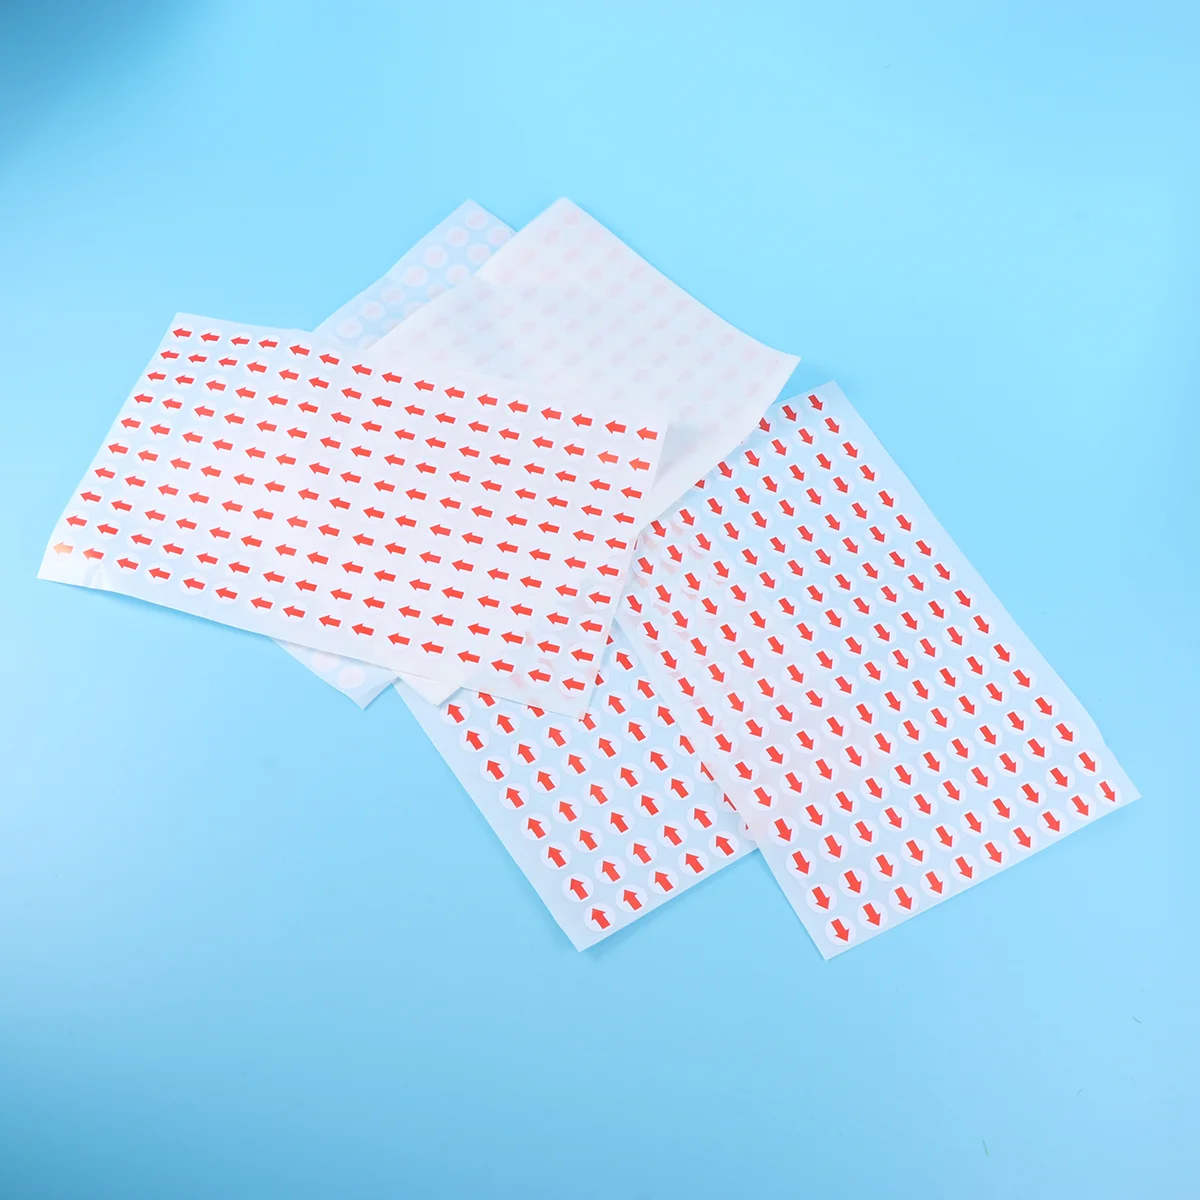 

10mm Self Adhesive Sticky Arrow Labels Small Circle Dot Stickers Product Inspection Defect Indicator Tape (White+Red)